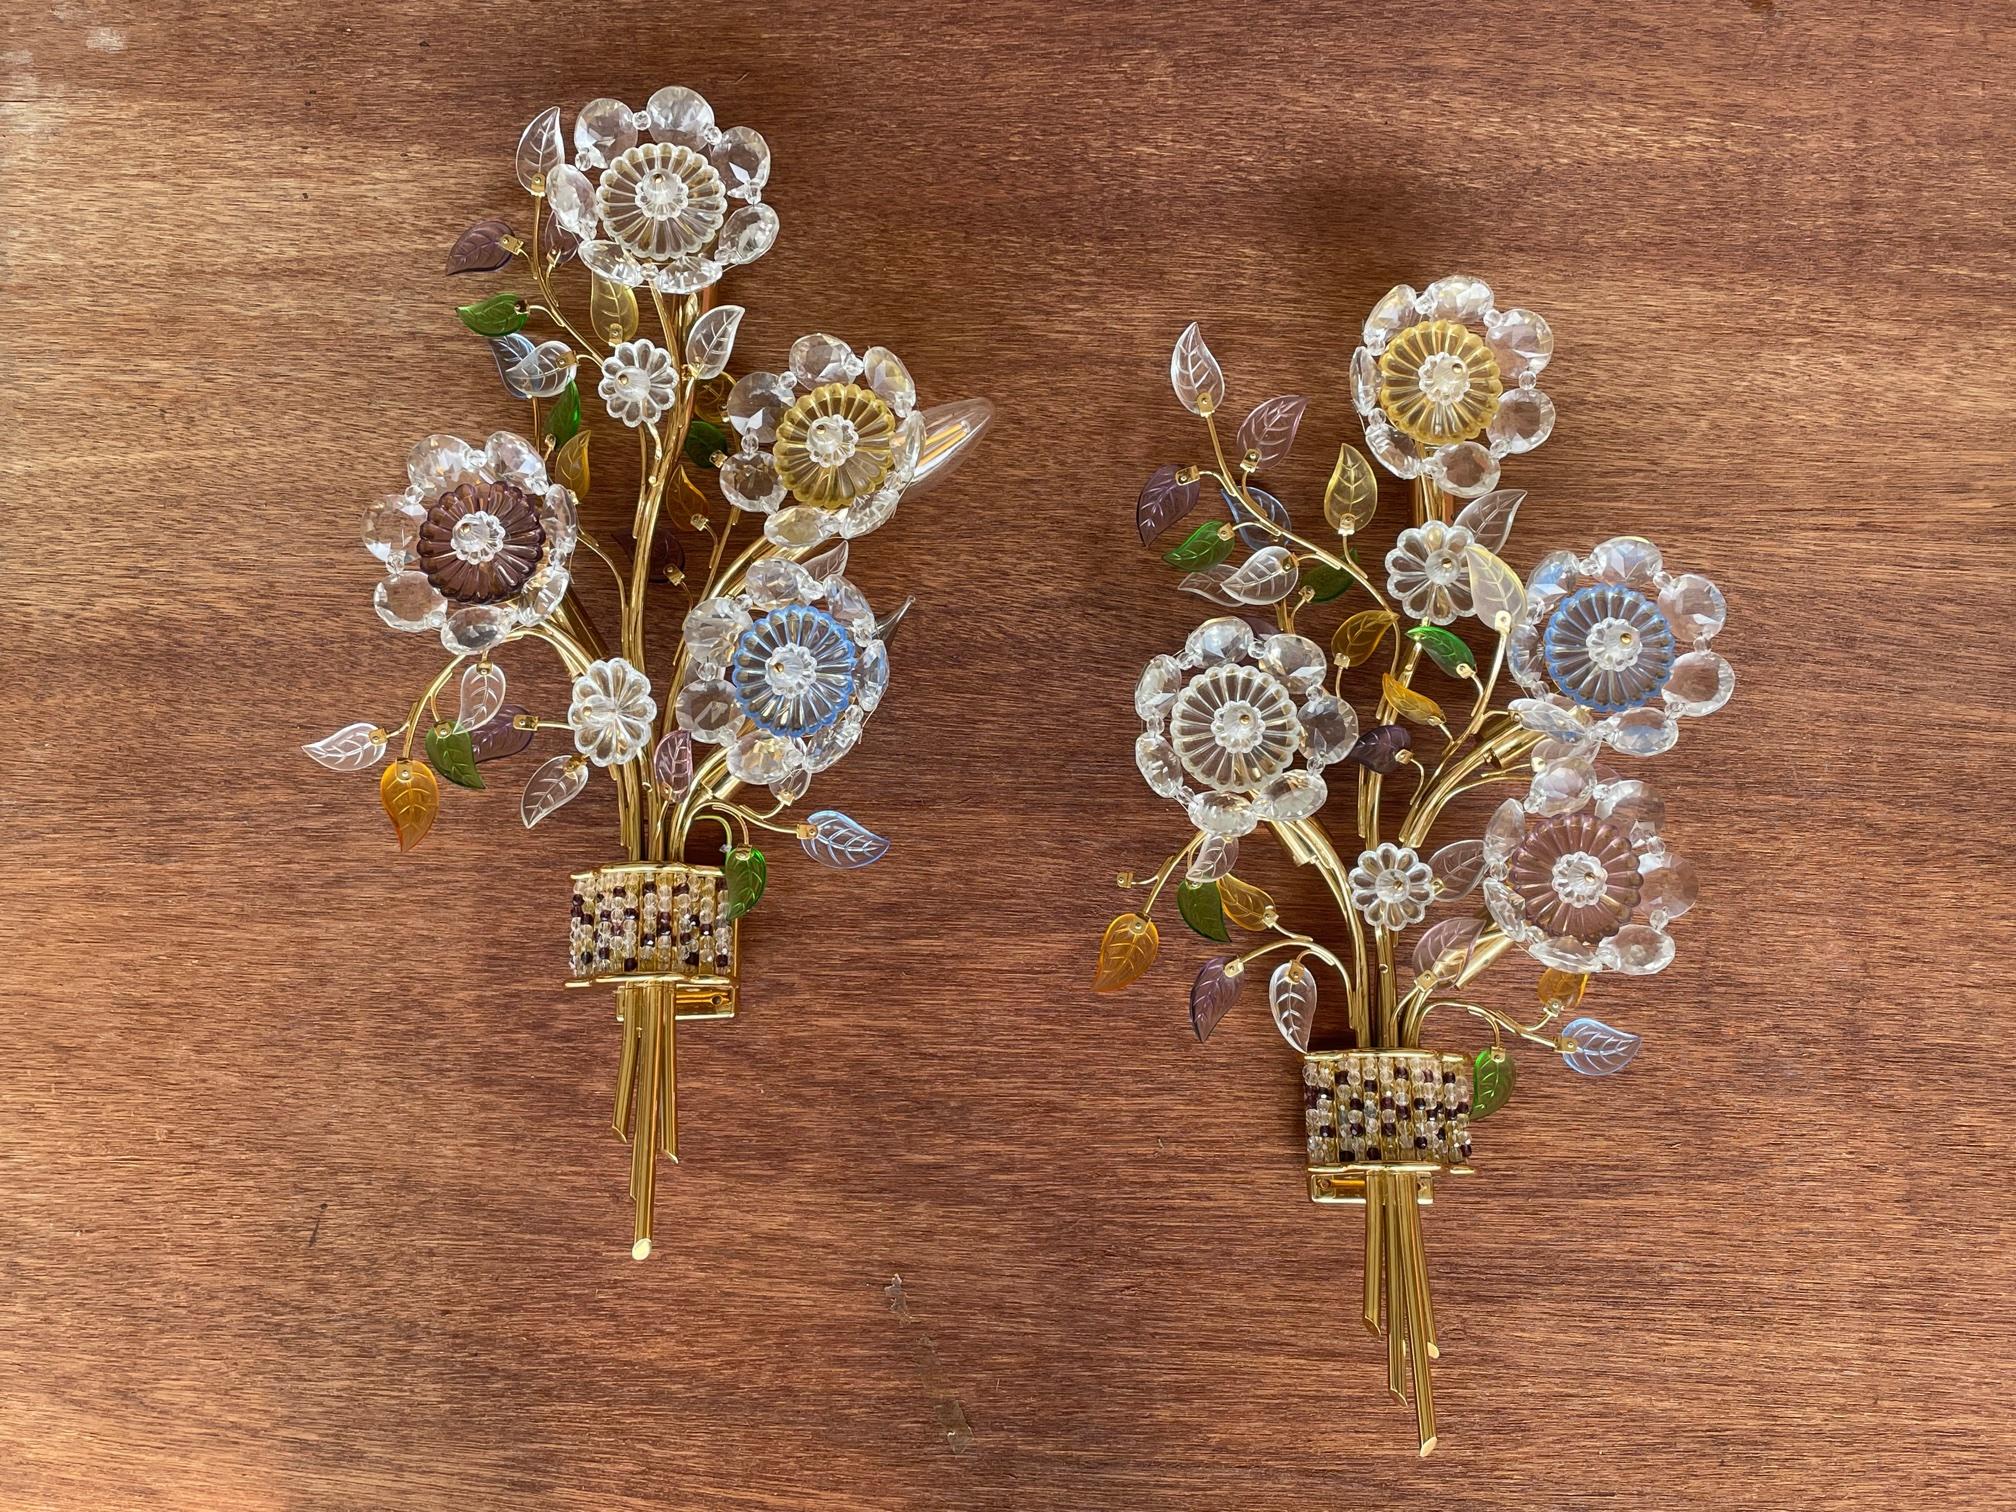 Fabulous pair of brass 4-light wall sconces feature cut glass flowers and leaves in a bouquet motif. Ready to be wall mounted and hard wired. Very good condition overall (see photos).
      